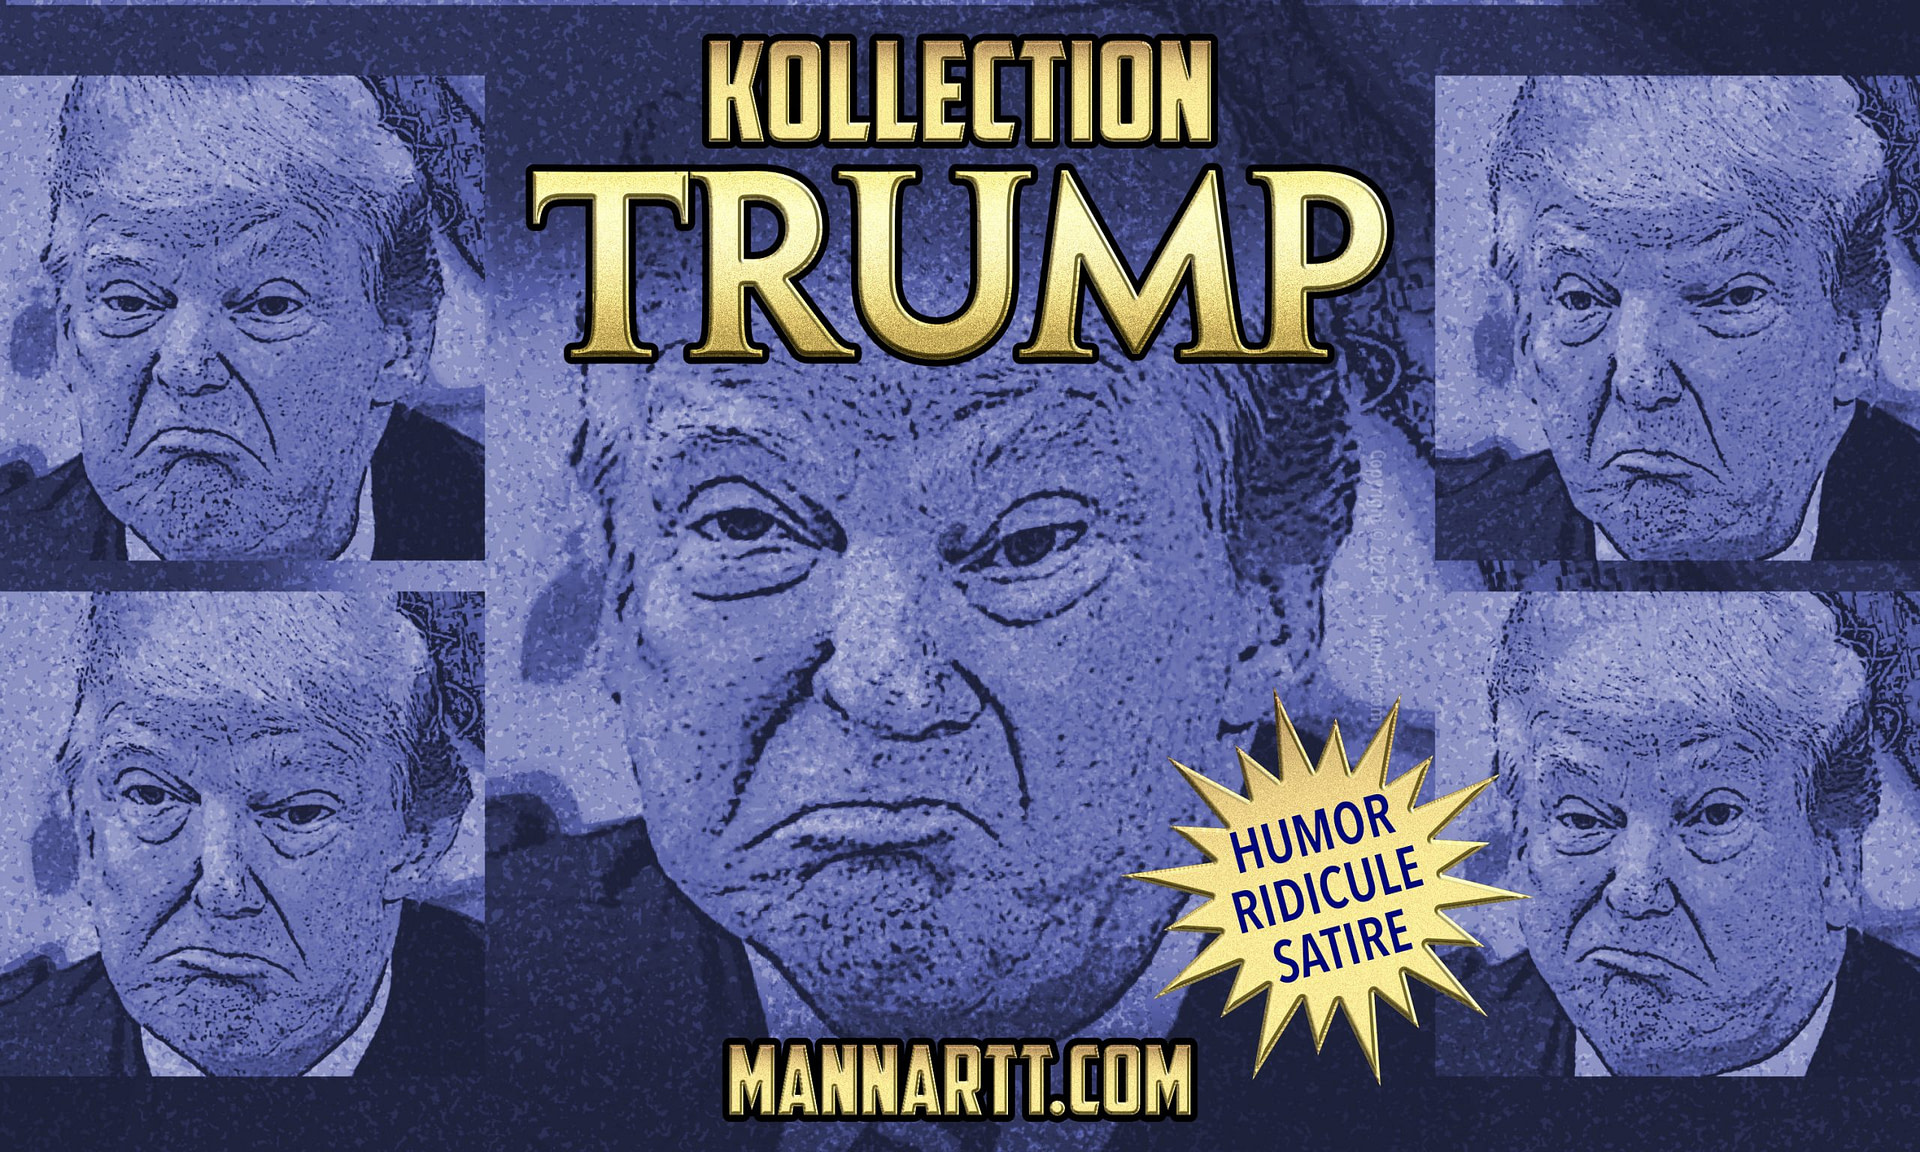 Kollection Trump: Art 4 the #ManBaby We Love to Hate 22